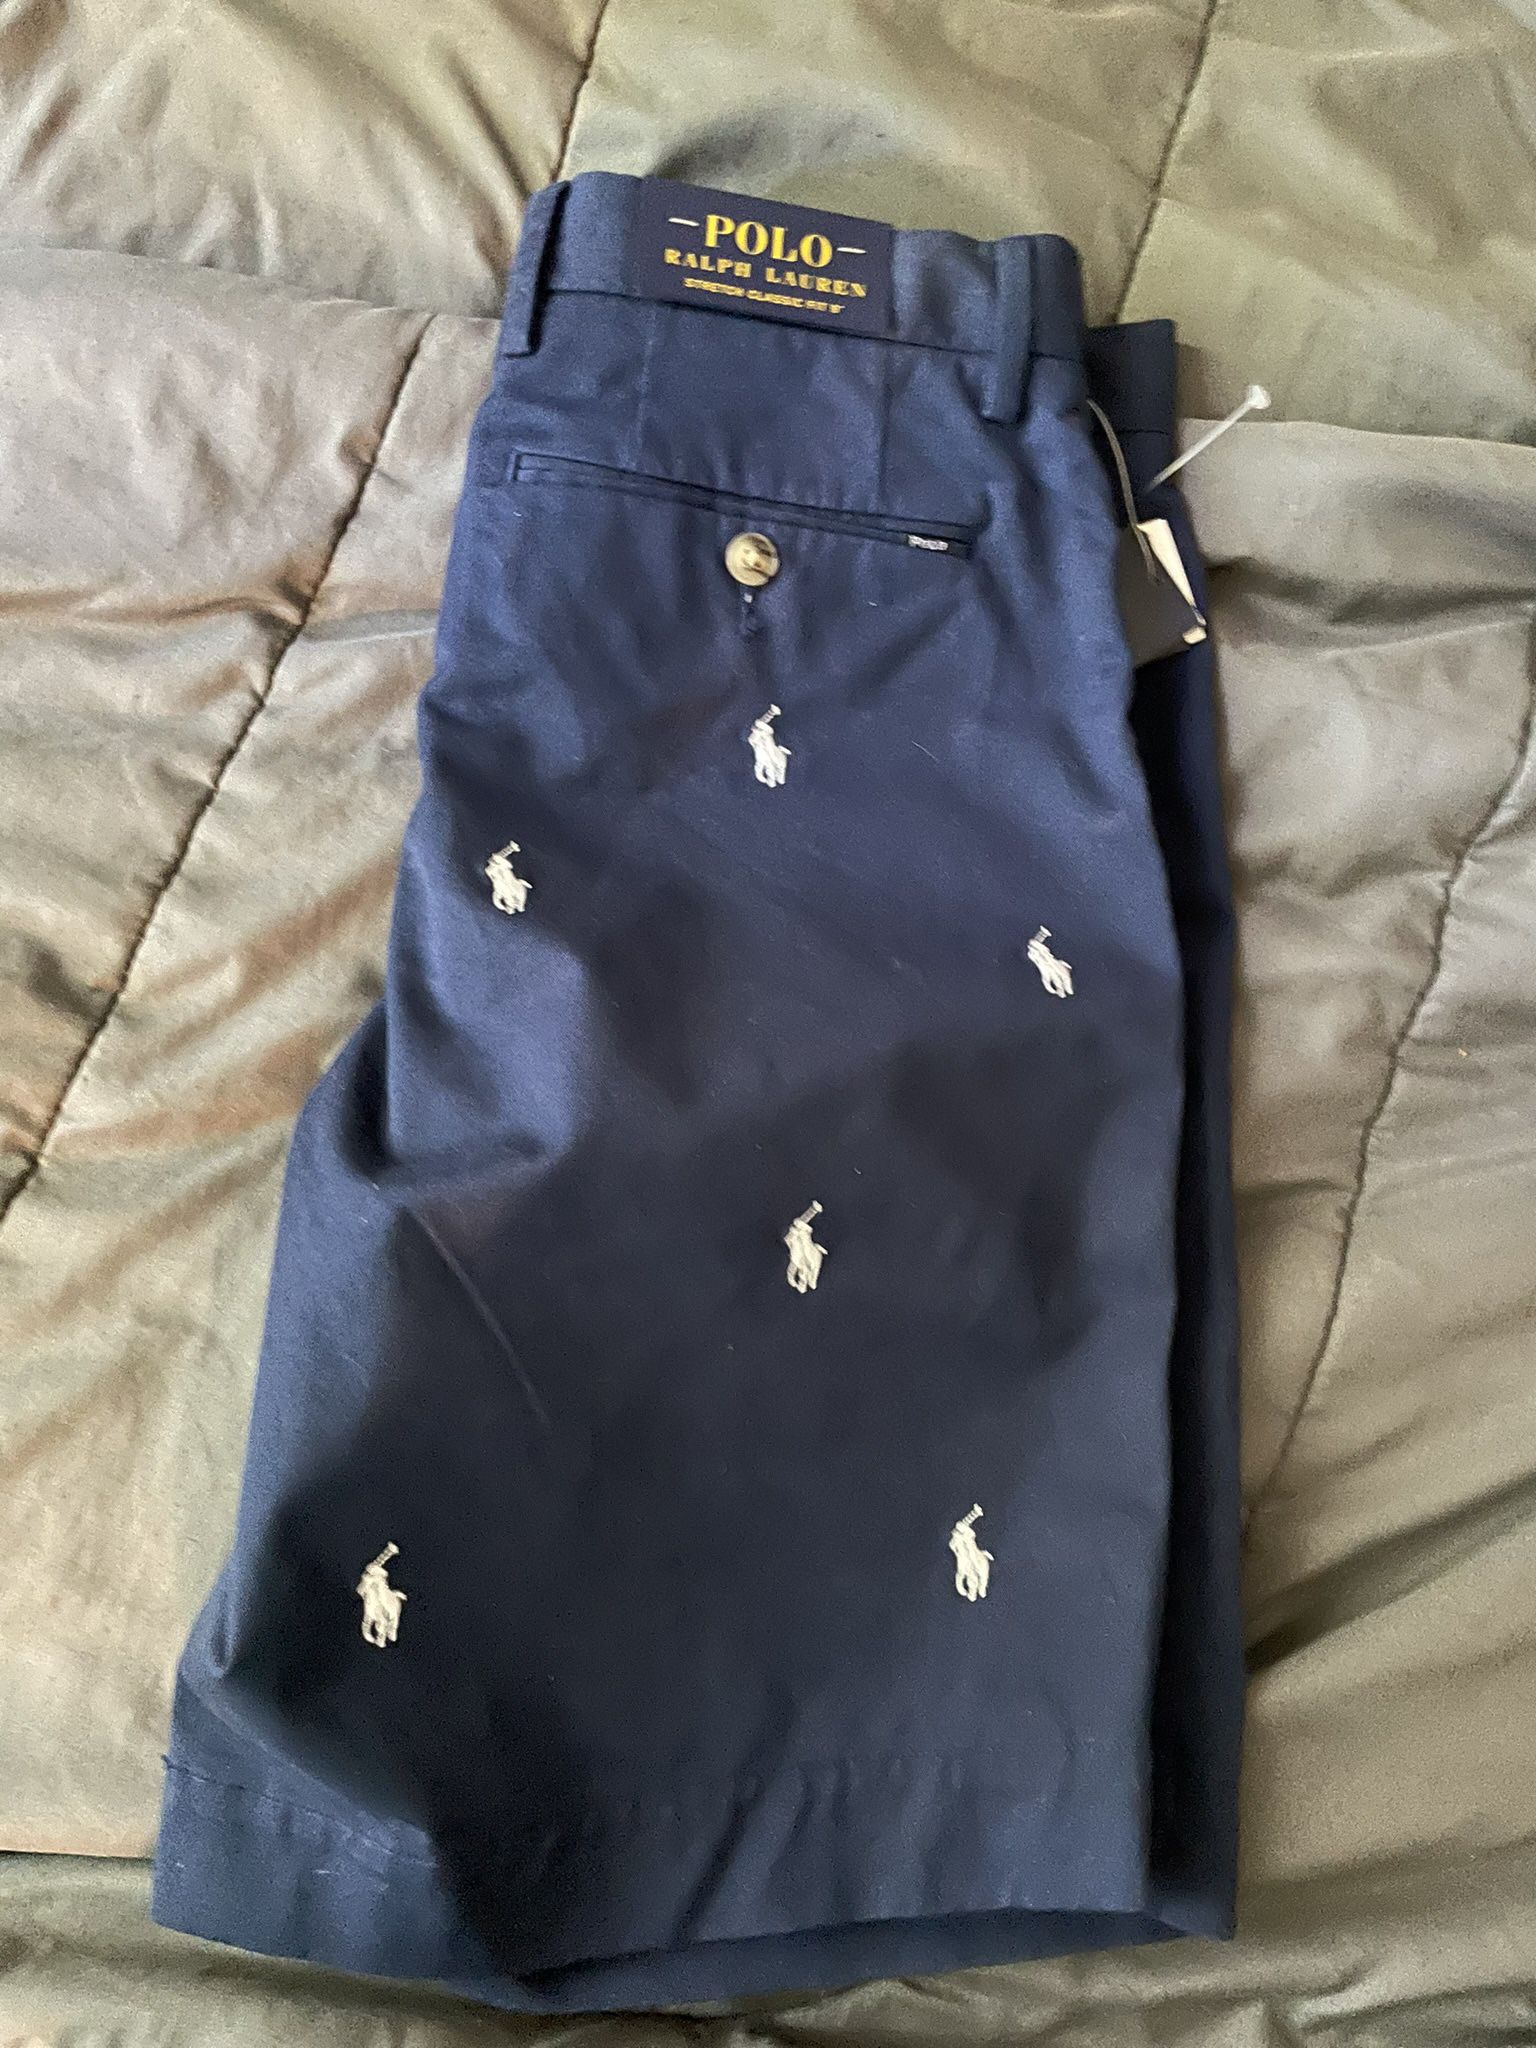 Polo Shorts Brand New, Nd True Religion Jeans Worn Once 